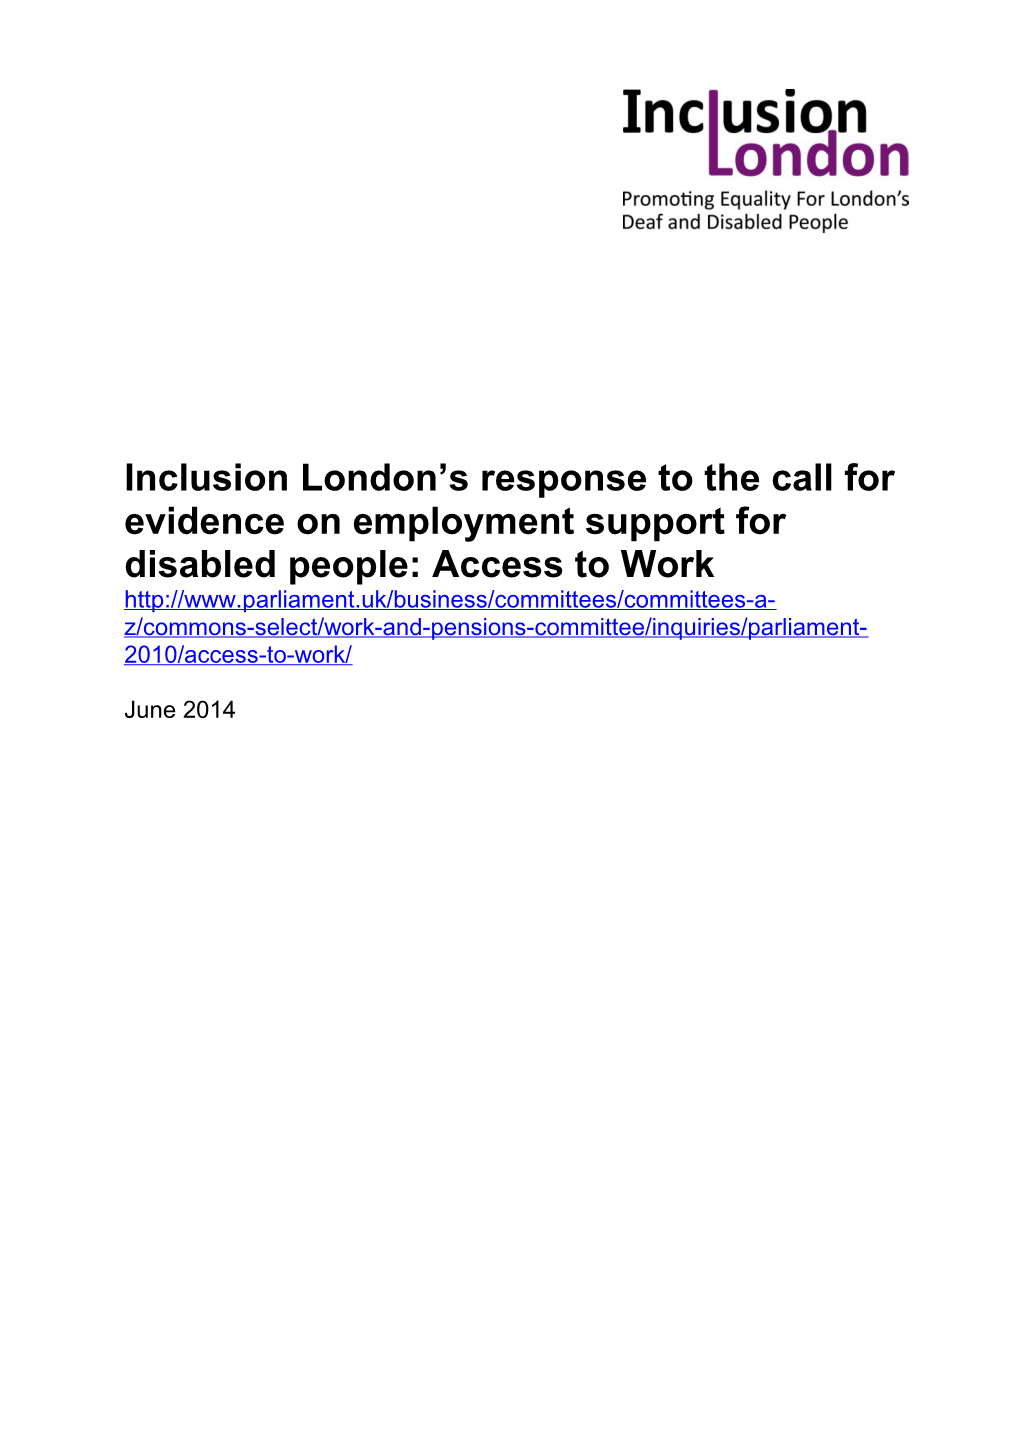 Inclusion London S Response to the Call for Evidence on Employment Support for Disabled